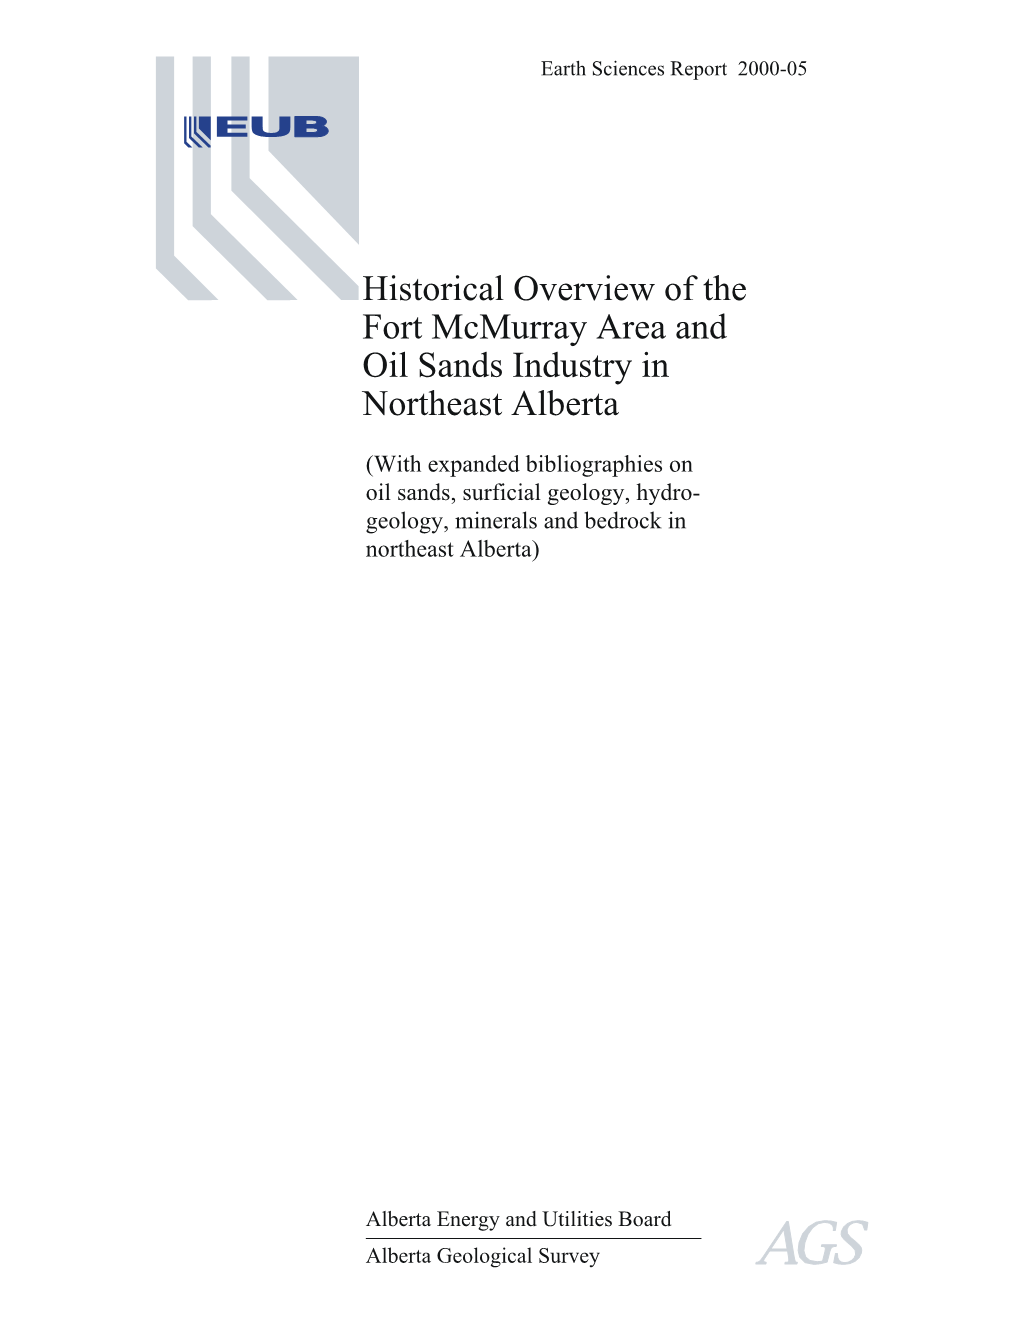 Historical Overview of the Fort Mcmurray Area and Oil Sands Industry in Northeast Alberta